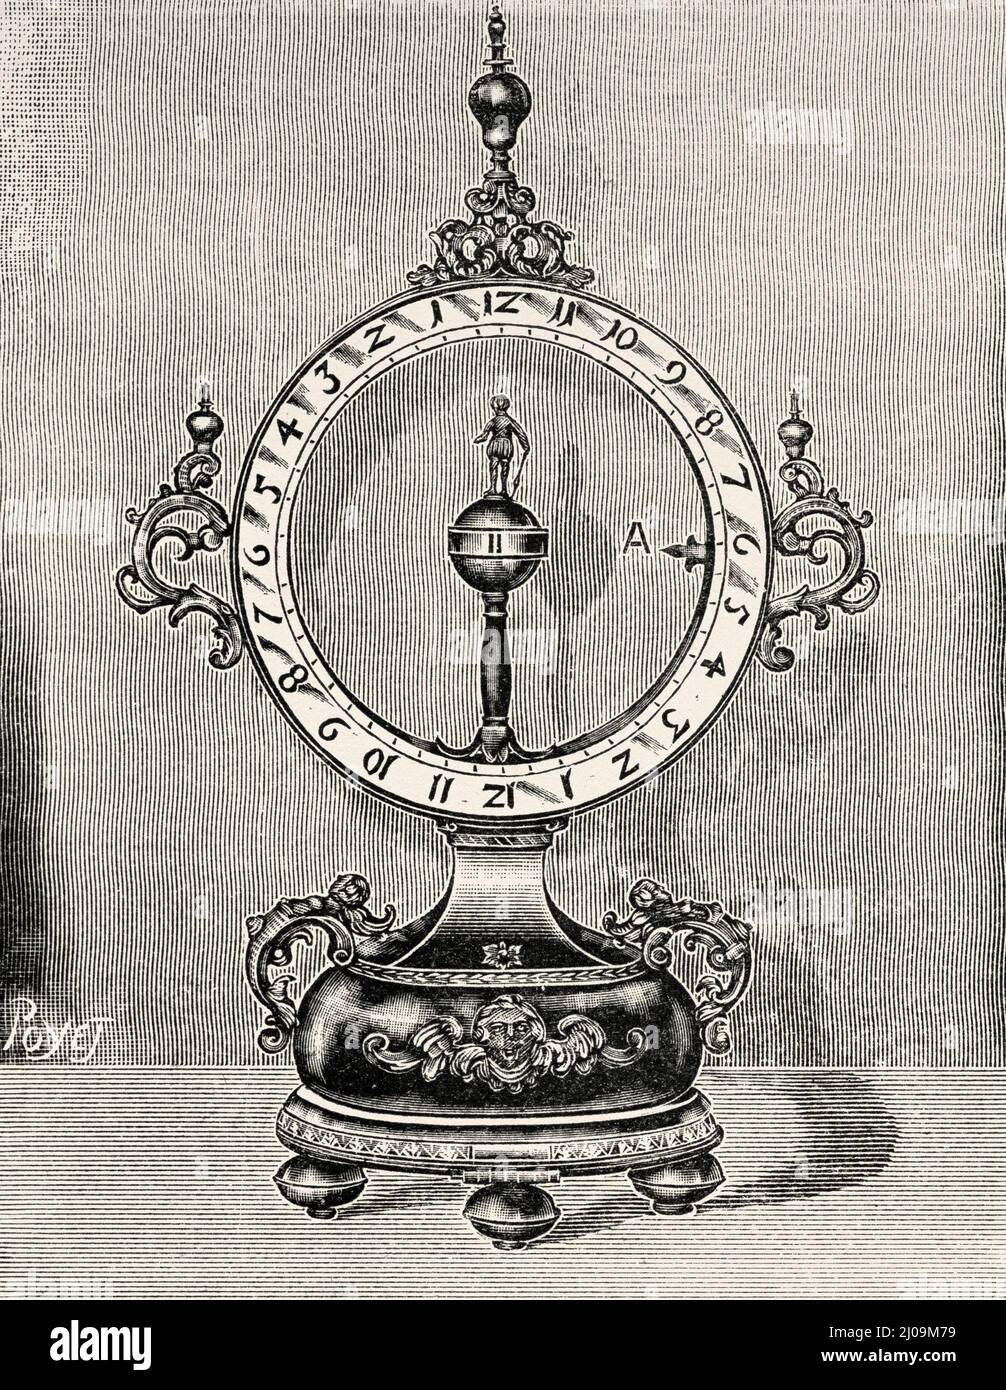 Mysterious seventeenth century clock. Old 19th century engraved illustration from La Nature 1899 Stock Photo